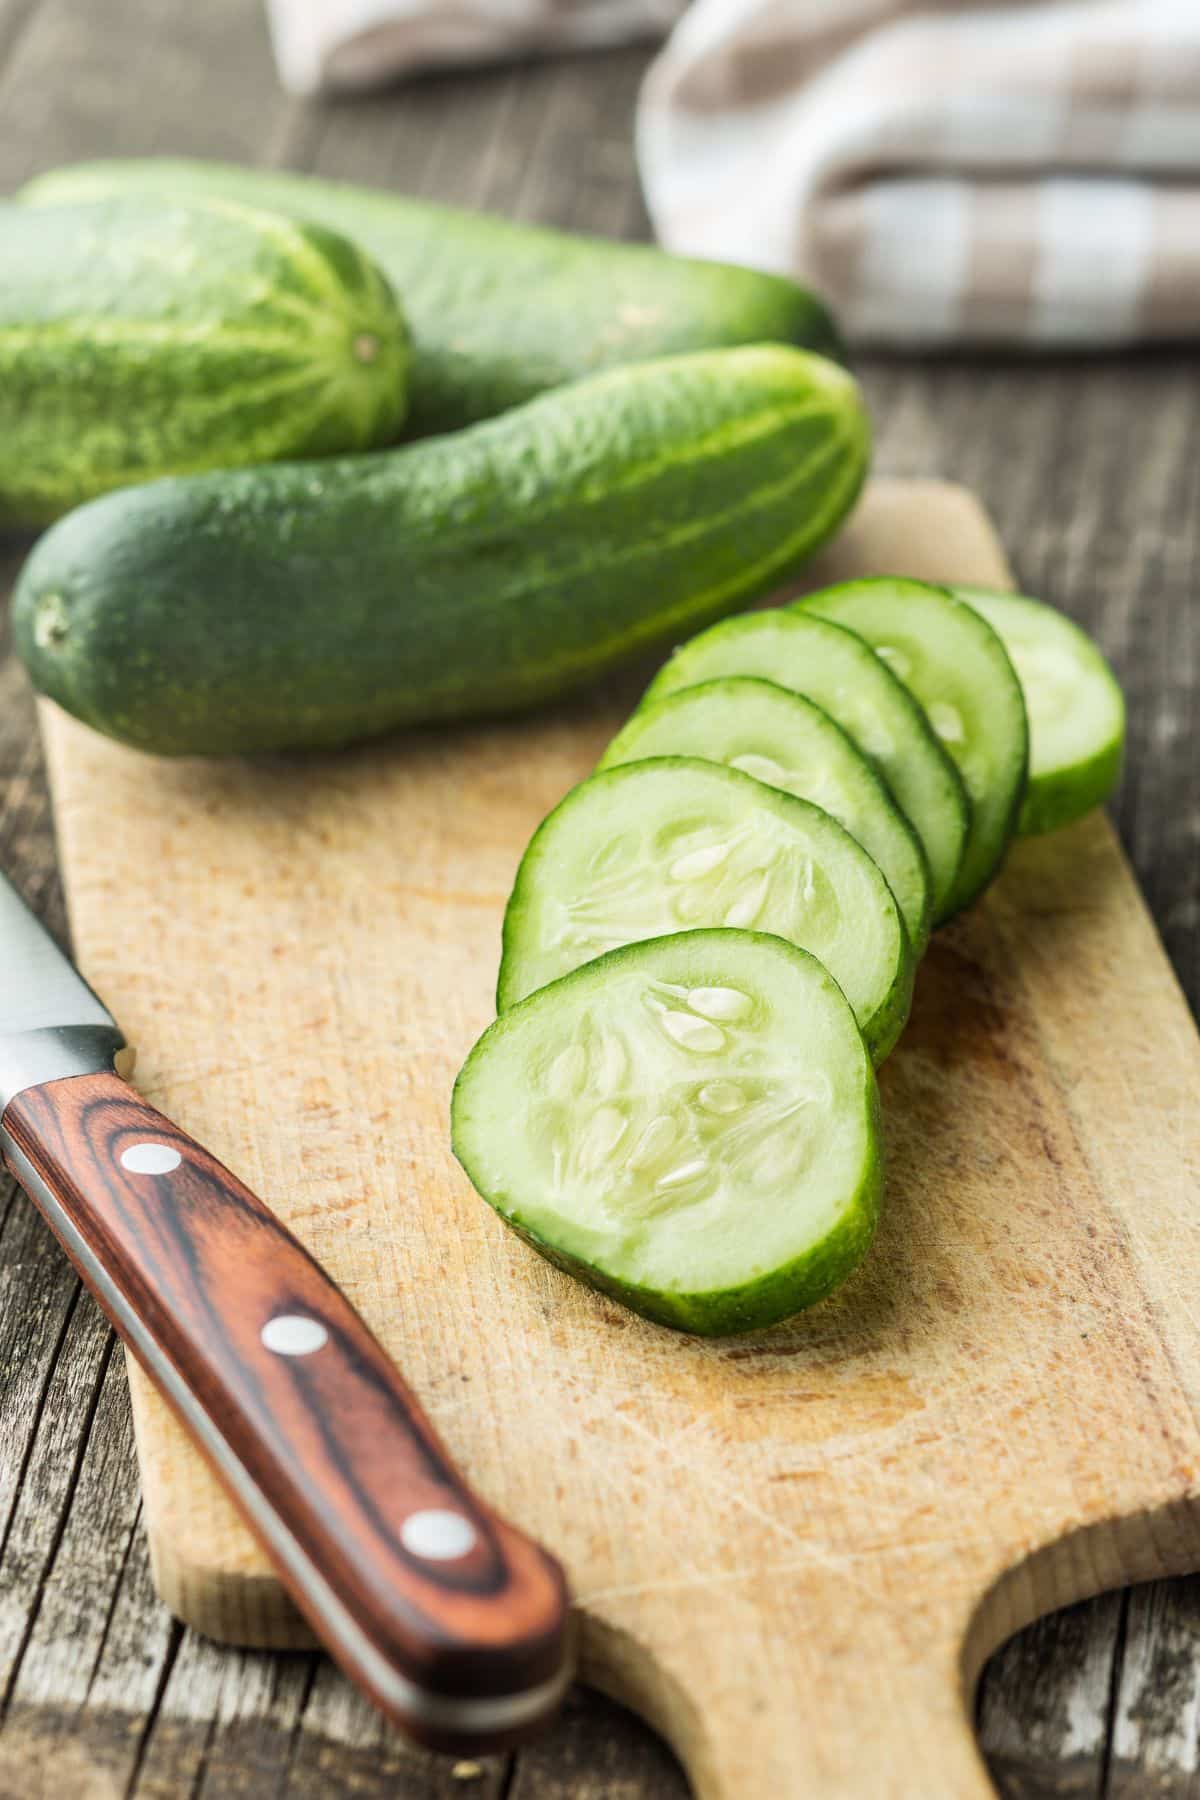 Whole cucumbers and fresh sliced rounds on a wooden cutting board.